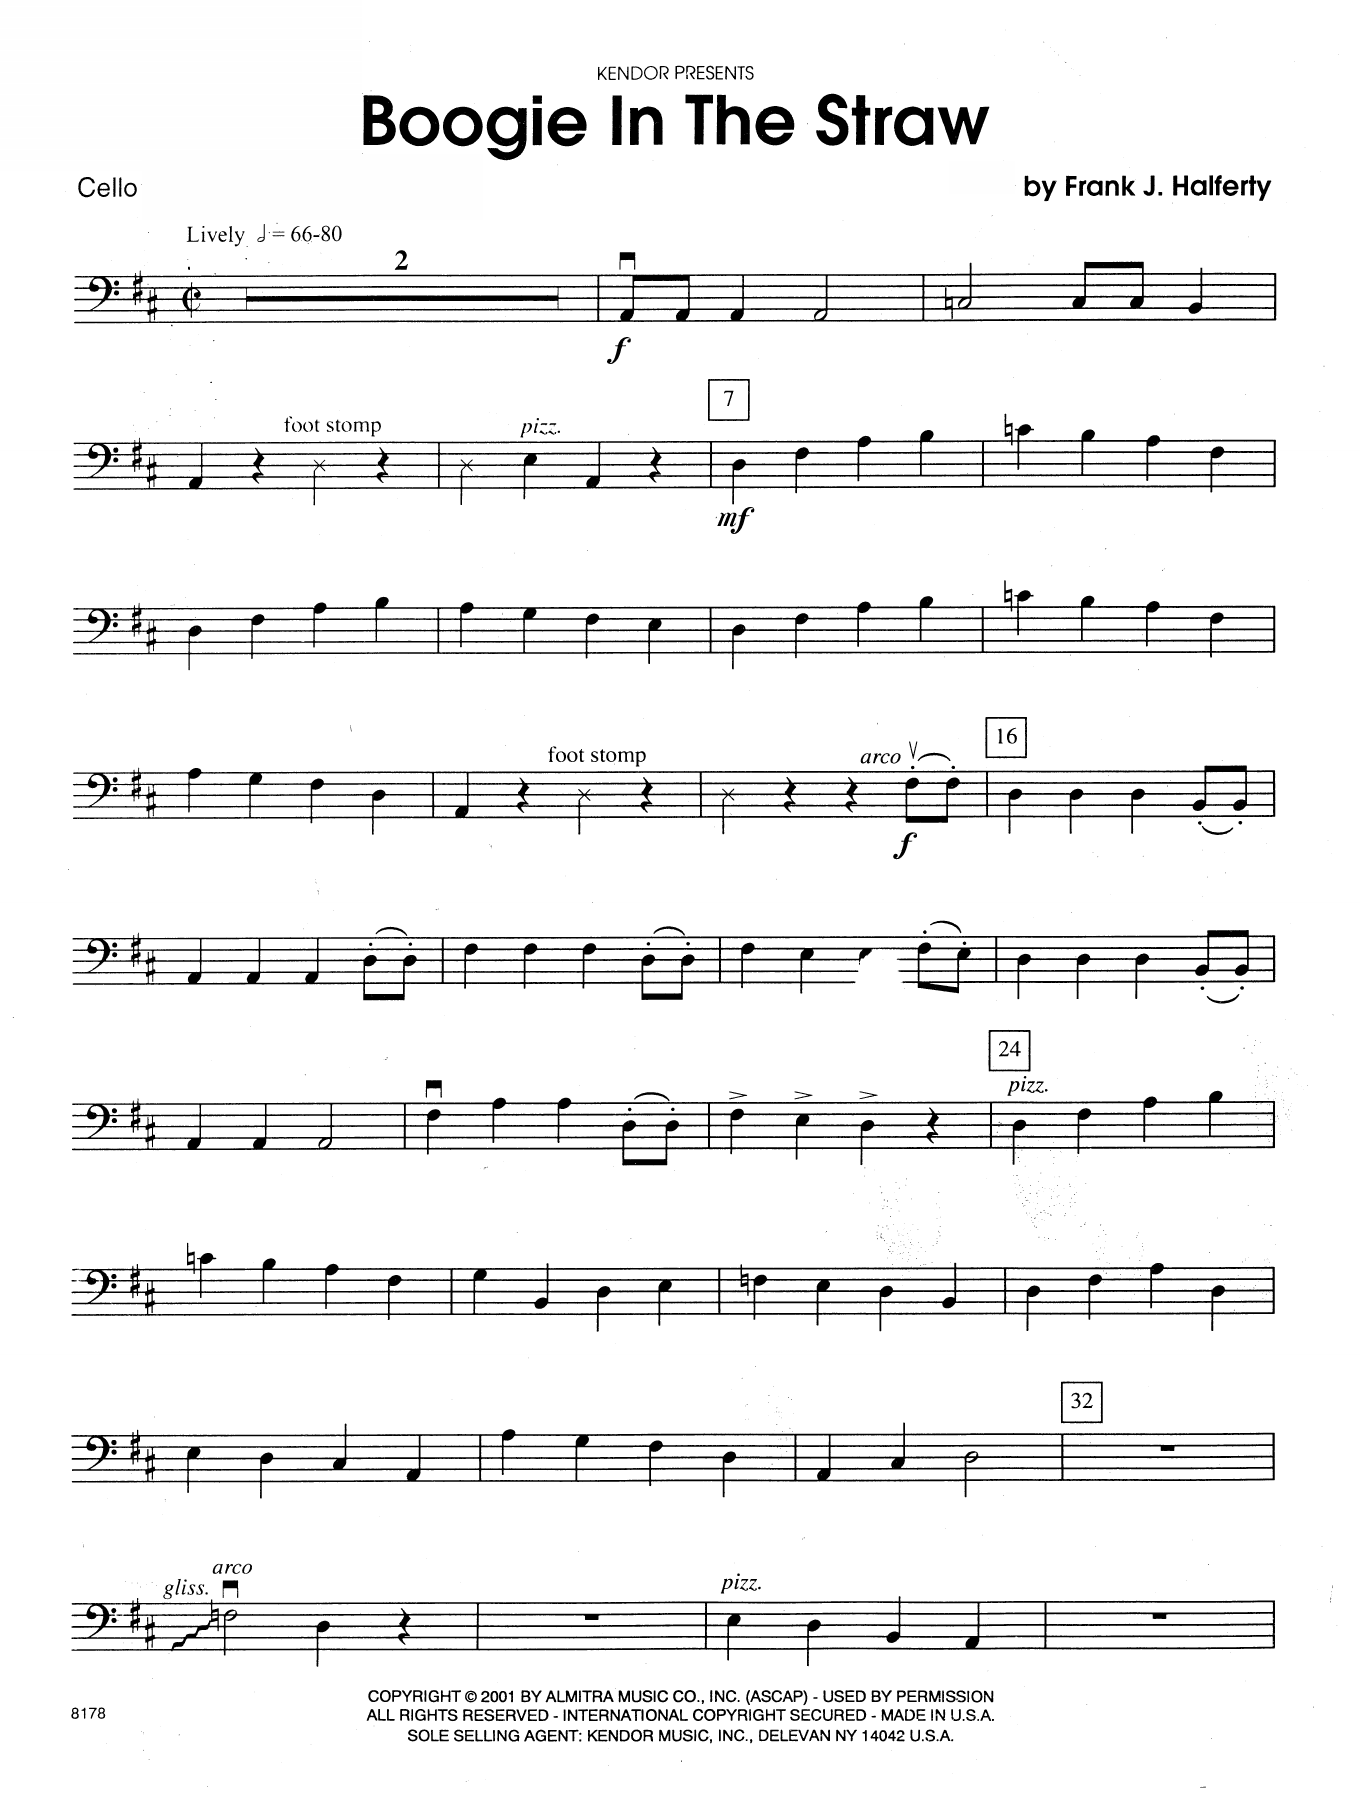 Download Frank J. Halferty Boogie In The Straw - Cello Sheet Music